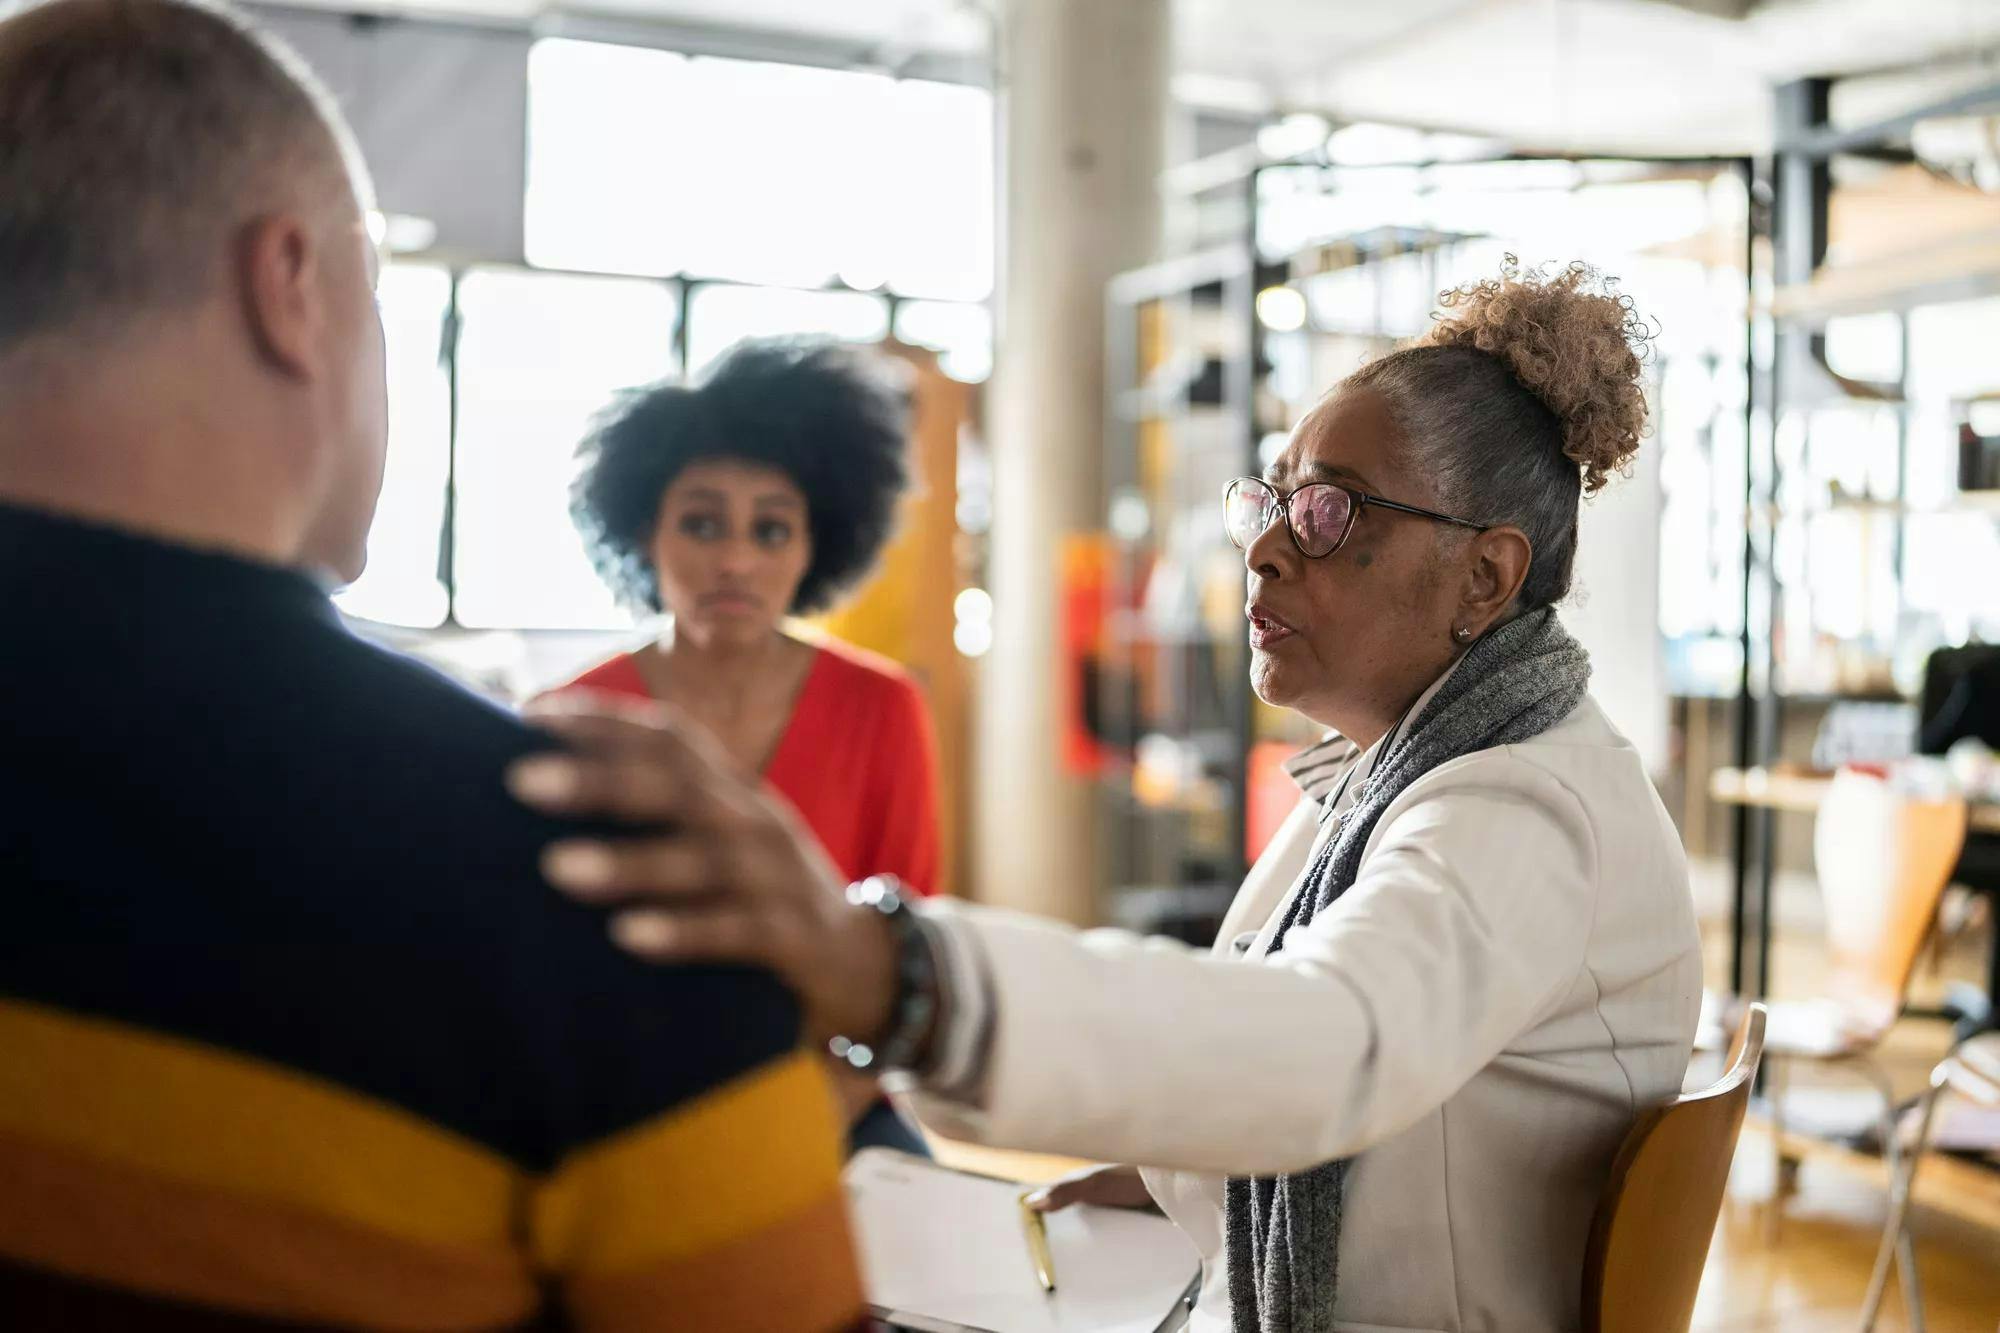 Senior woman comforting a mature man in group therapy at a coworking - stock photo
Senior woman comforting a mature man in group therapy at a coworking